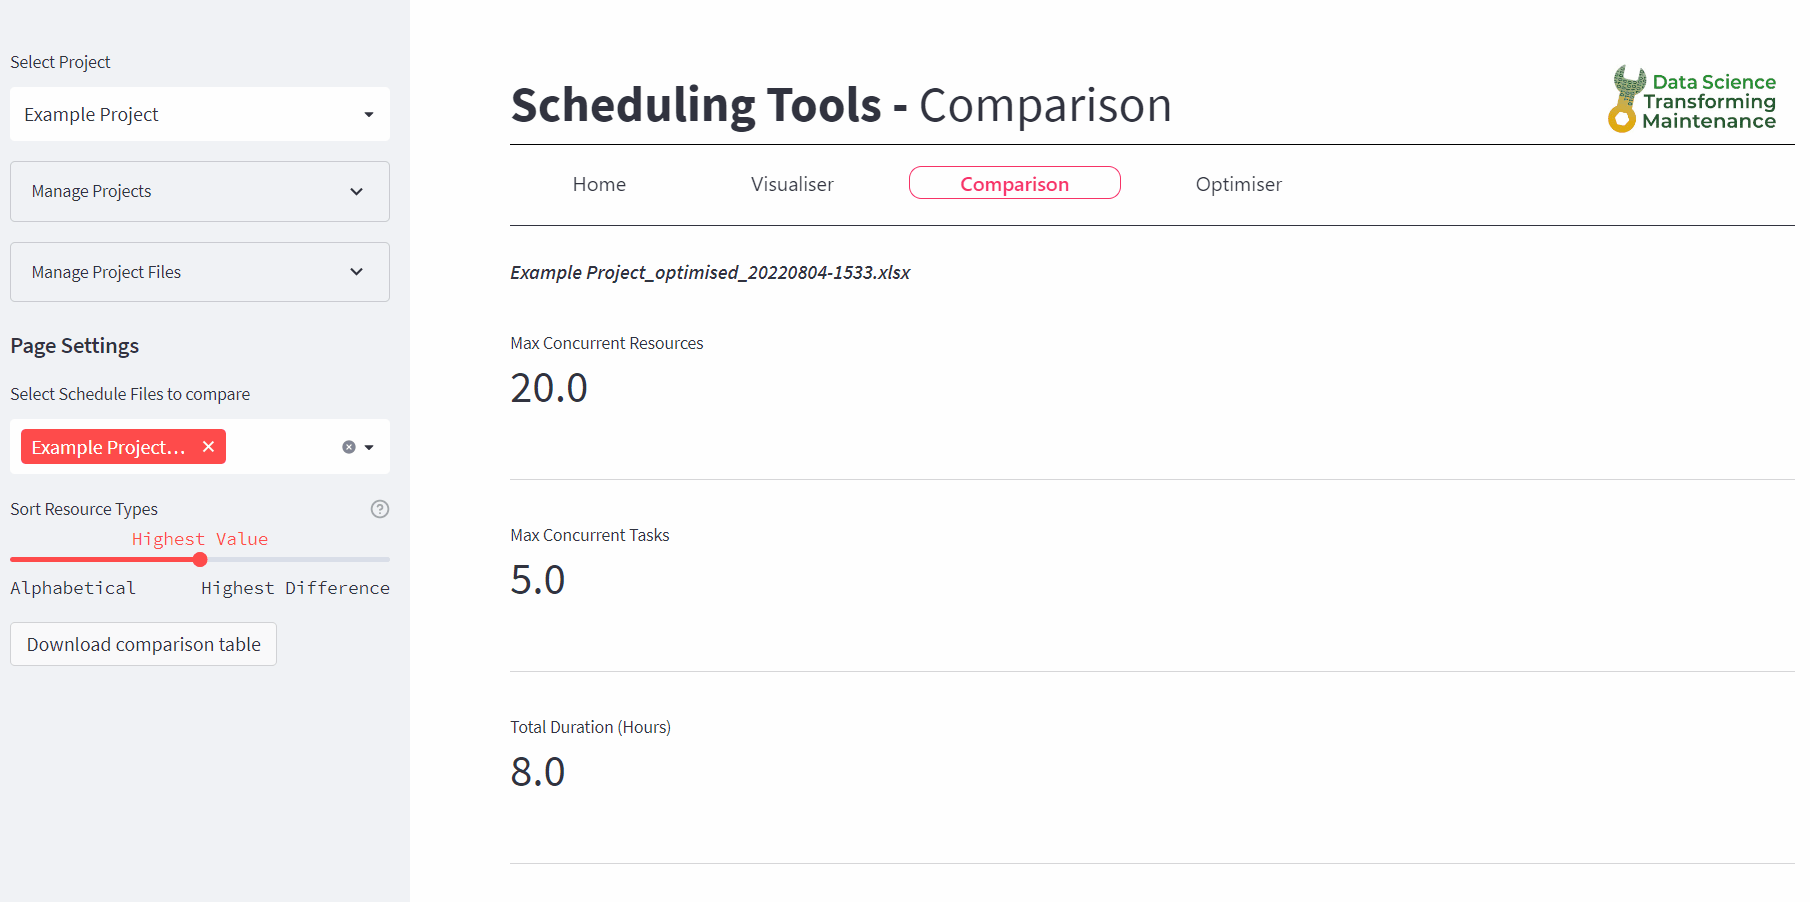 The schedule comparison tool